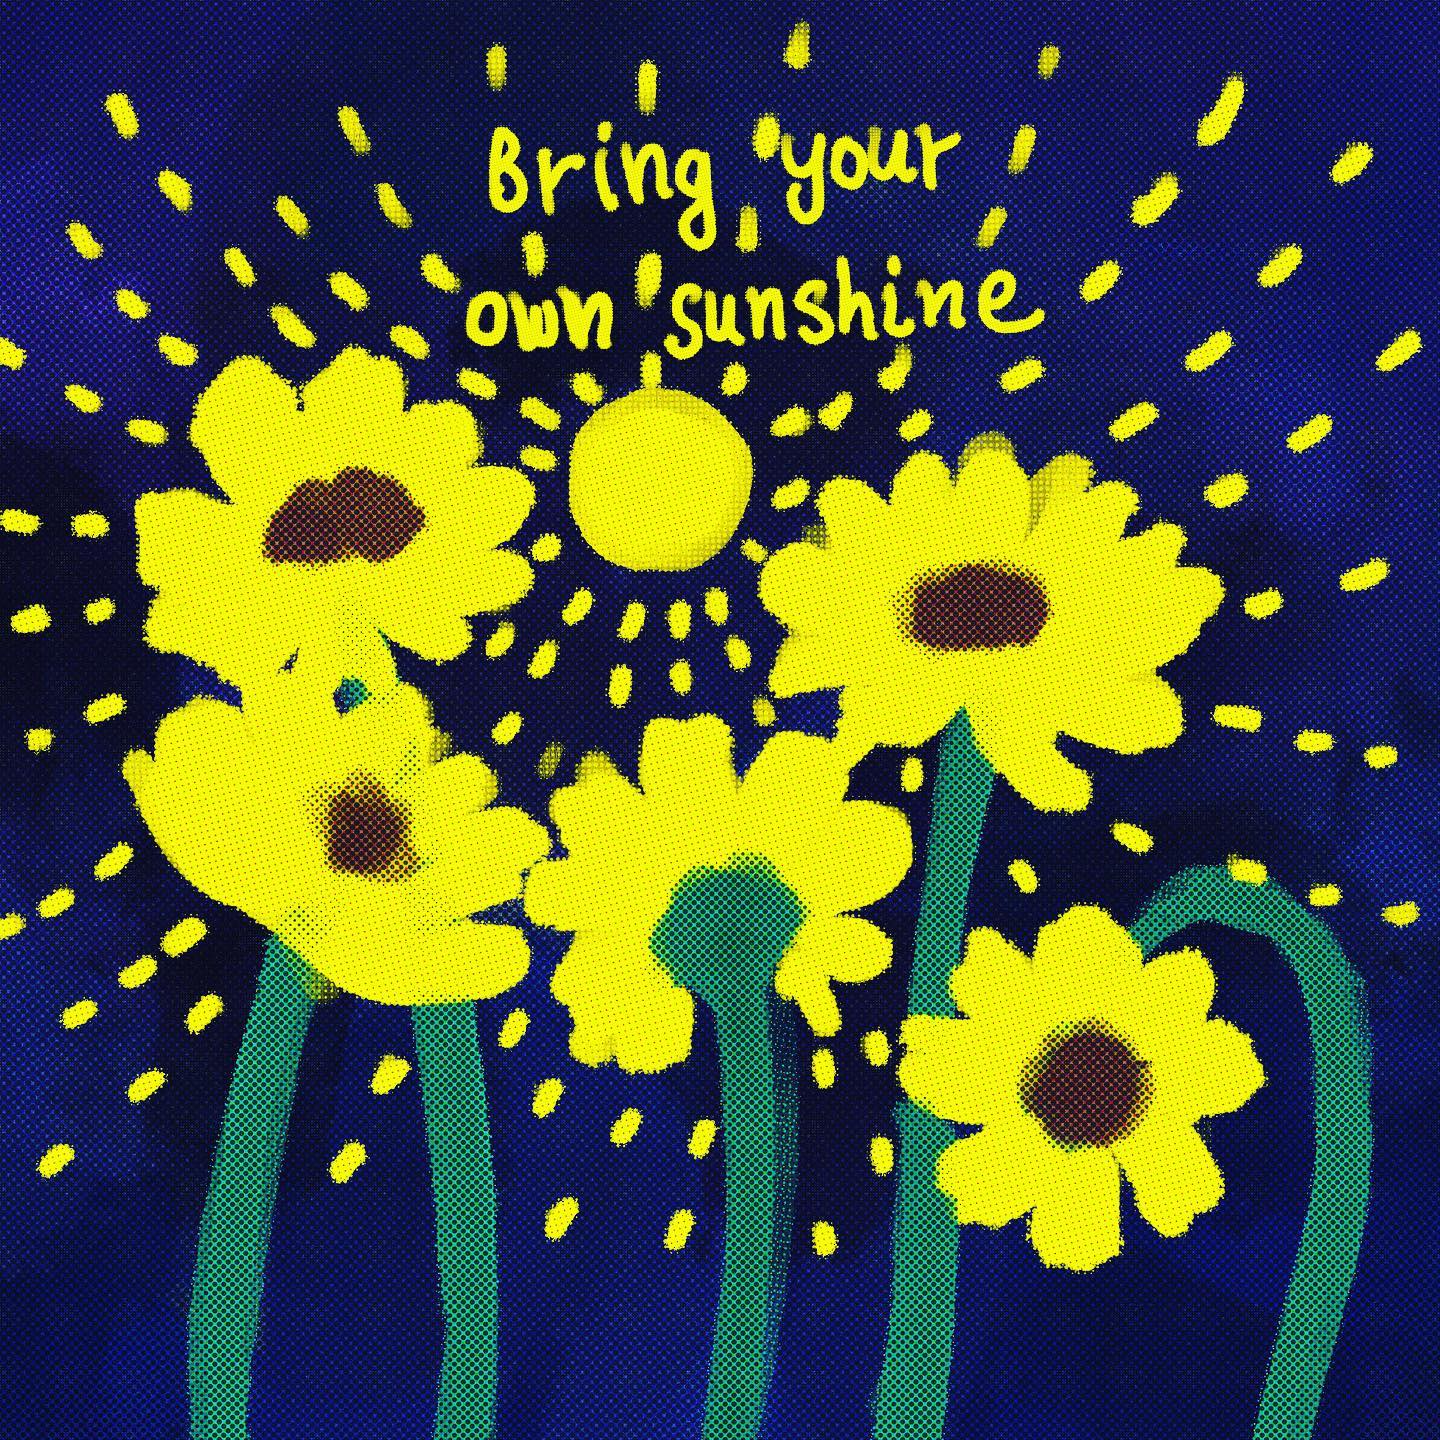 Bring your own sunshine no matter what and wherever you go for darkness is nothing but the absence of light. 

Shine on?